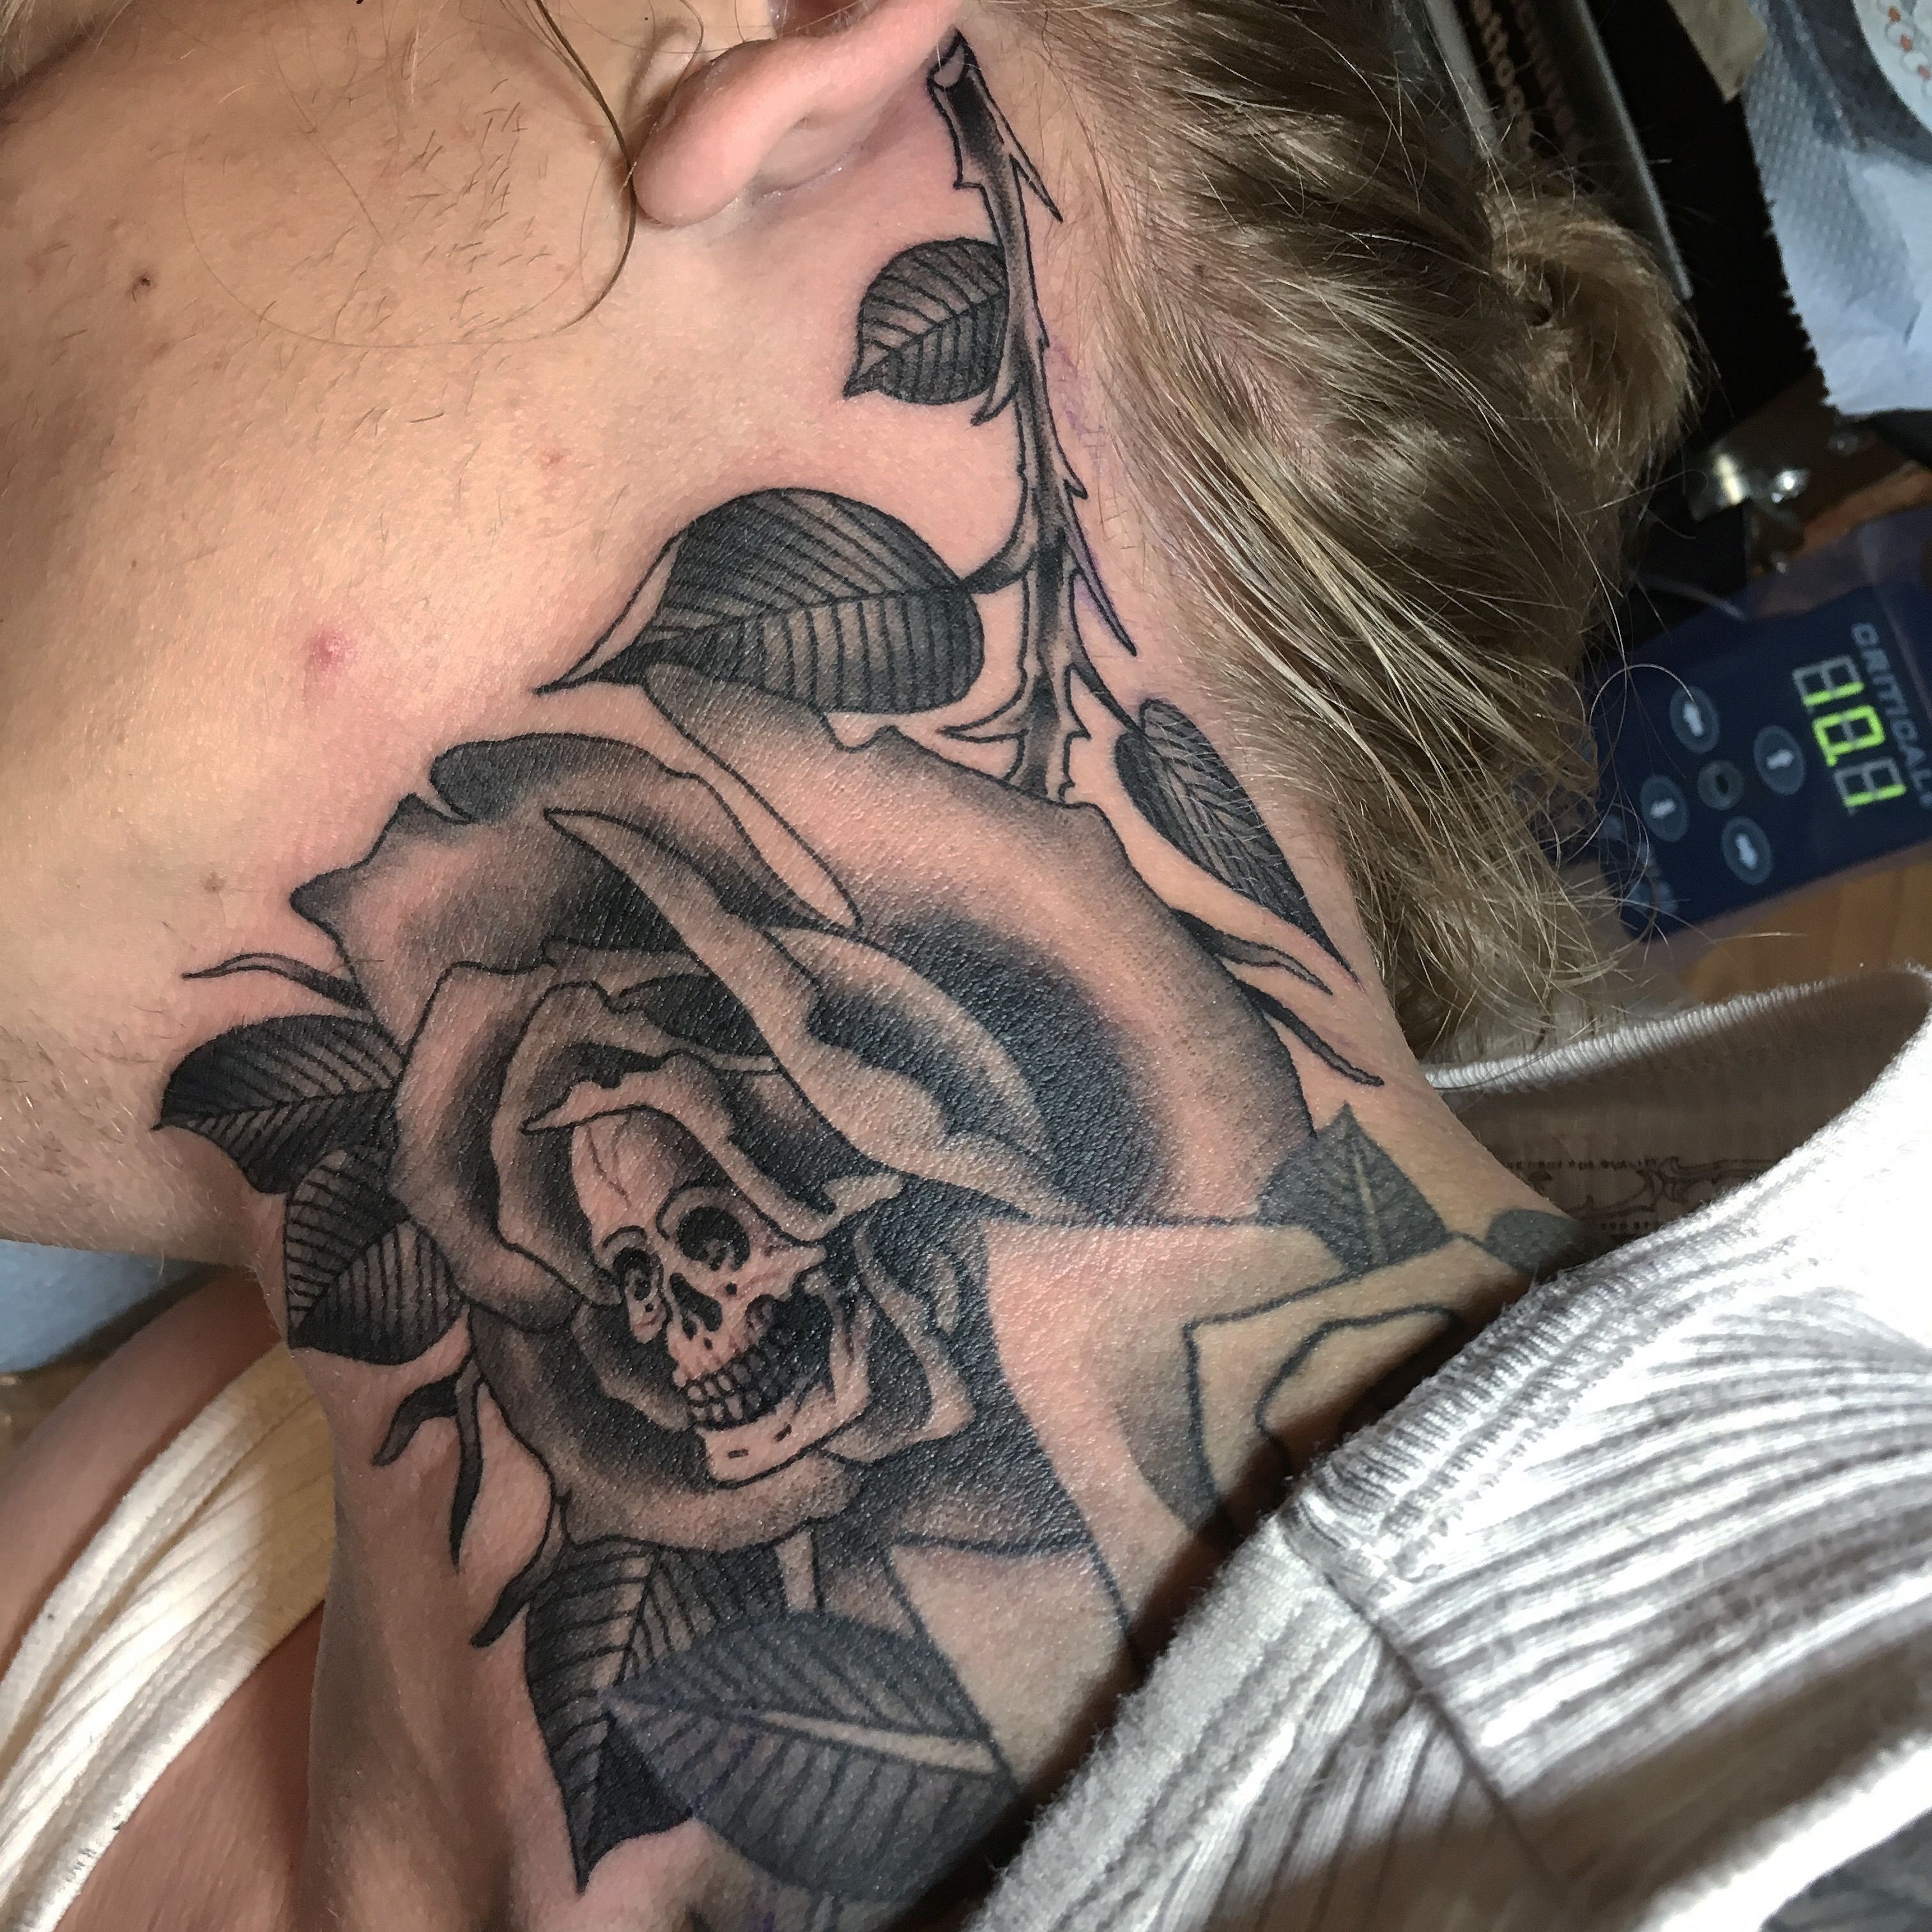 BIG SLEEPS STUDIO on Instagram ROSE NECK TATTOO BY YELY  TEXT  3108818835 or DM us to book your session with yelytattoo  x x x  BigSleepsstudio